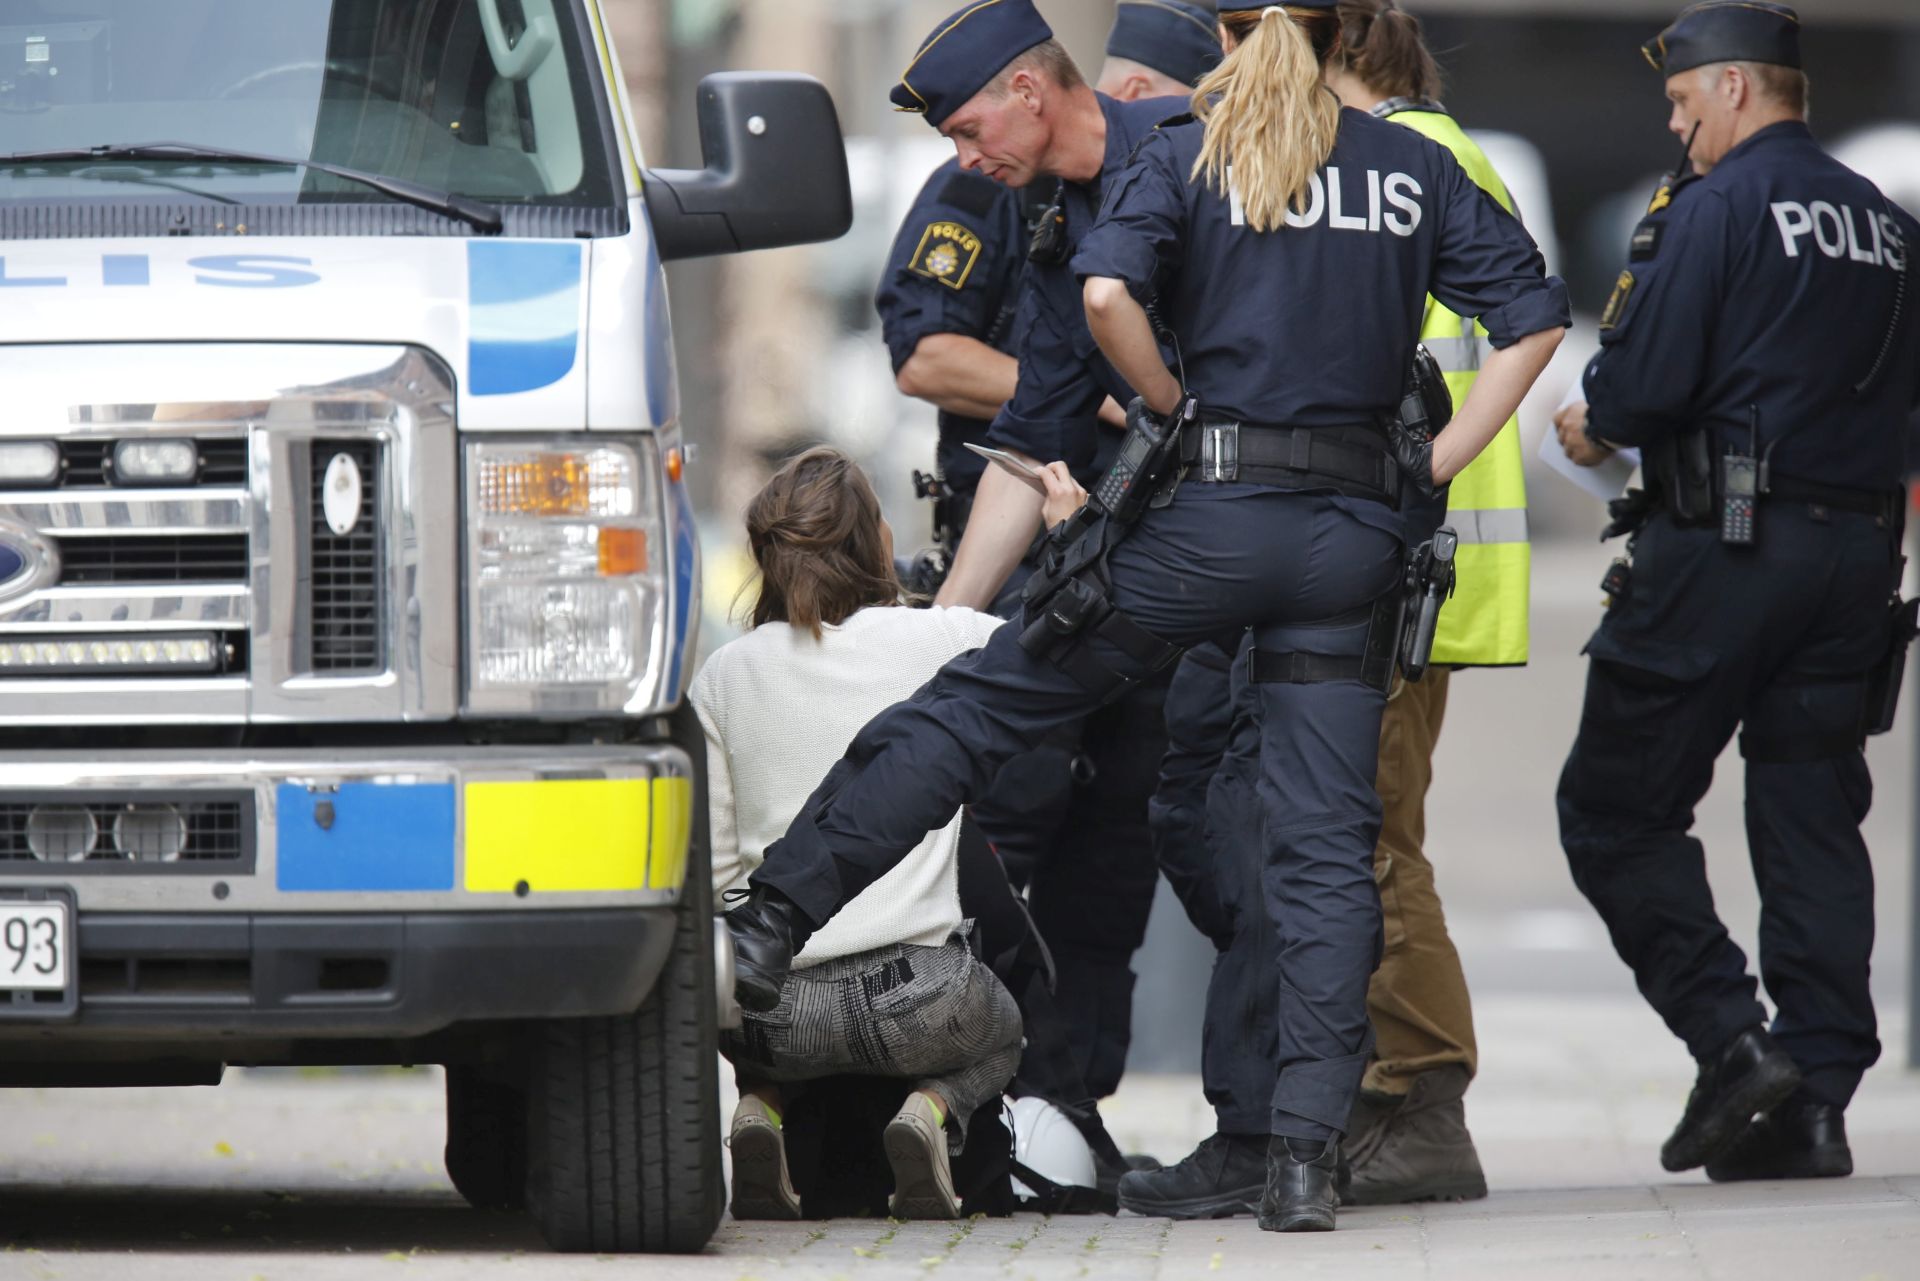 epa05366182 Swedish police checks the papers and backpack of a young woman after two men and two women earlier were arrested after treepassing the main entrance and a roof to the Swedish government's seat 'Rosenbad' in Stockholm, 15 June 2016. Anti-coal activists which reportedly were from England, Germany, Denmark and Sweden deployed a banner with a slogan reading: 'Let the coal stay where it is' in front of the Prime Minister's office in Stockholm to oppose the coal policy of Swedish state-owned energy giant Vattenfall.  EPA/CHRISTINE OLSSON SWEDEN OUT